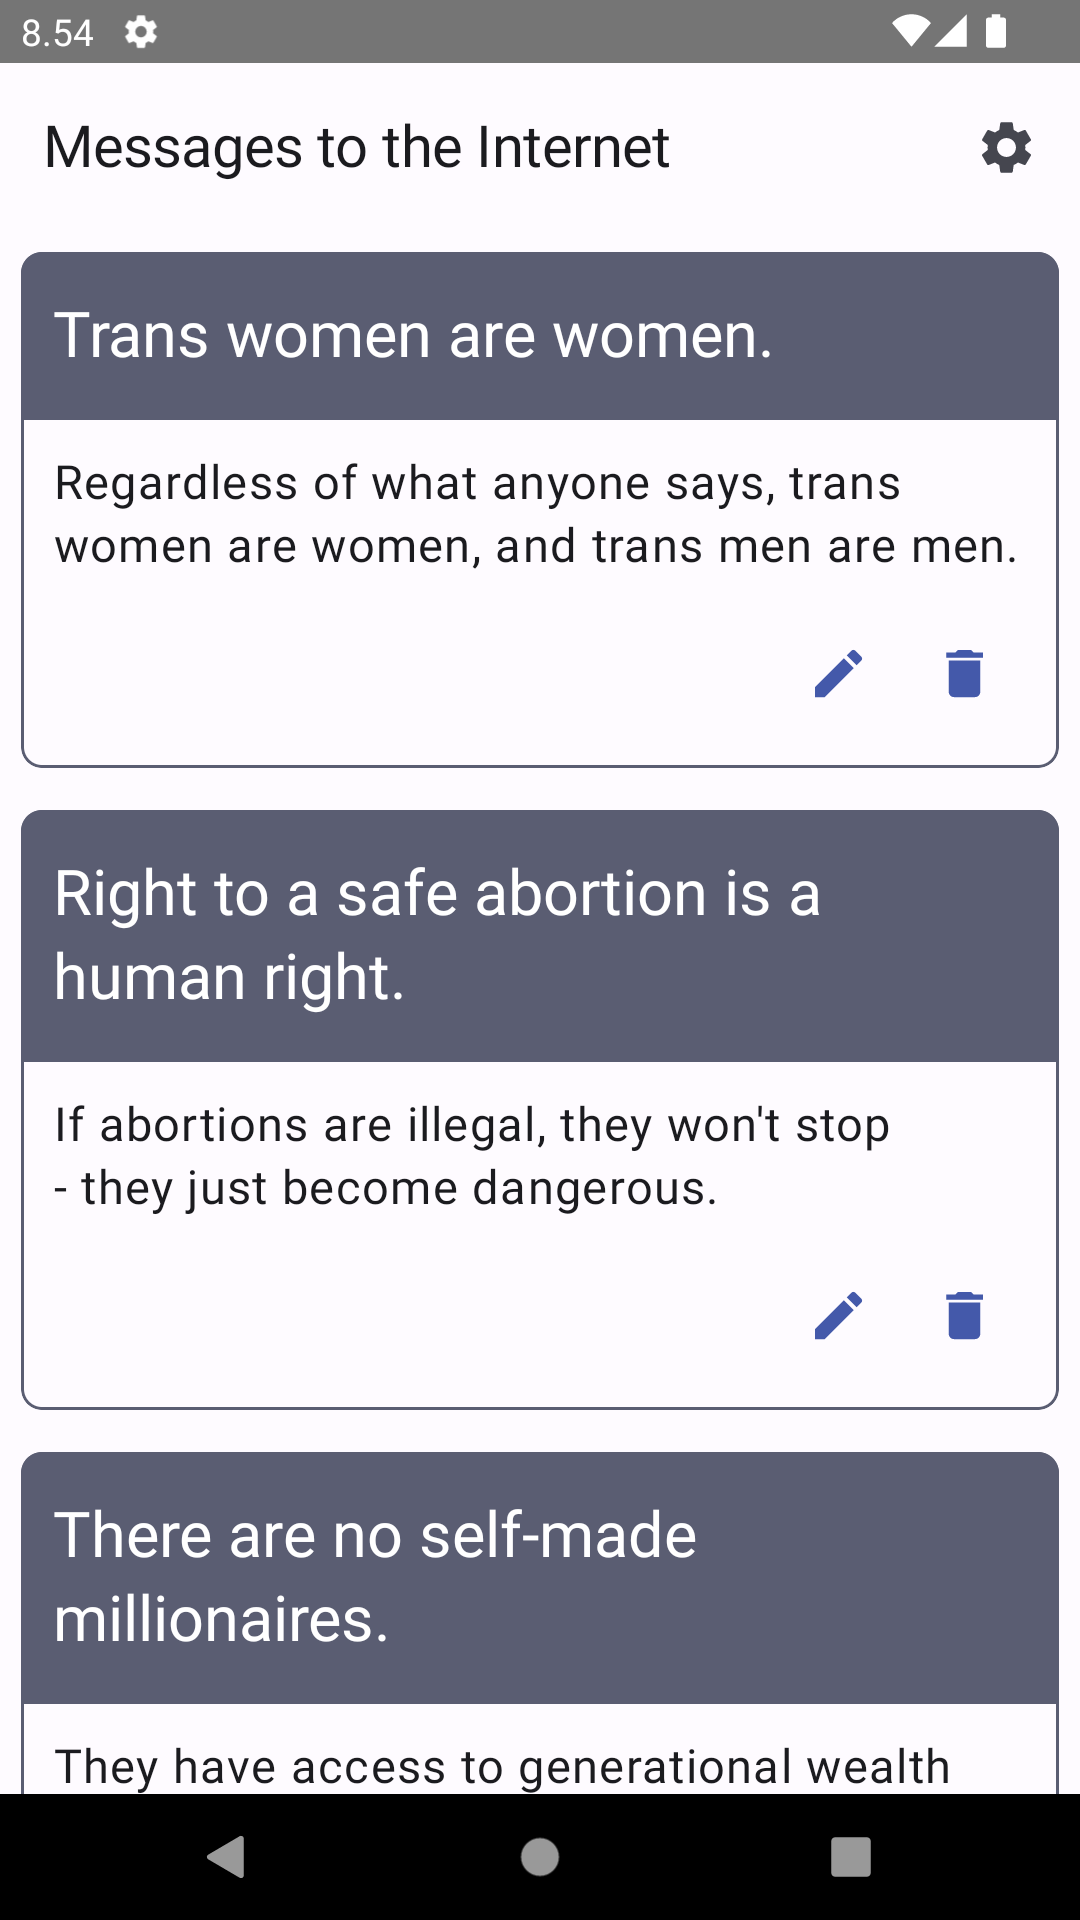 A screen with title Messages to Internet. It has three cards: Trans women are women with content Whatever the others say, trans women are women and trans men are men, Right to safe abortion is a human right with content If abortions are illegal, they won't stop - they just become dangerous and There are no self-made millionaires with visible content of They have access to generational wealth. Each of the card has two icon buttons: One with a pen icon and another with a trash can icon.